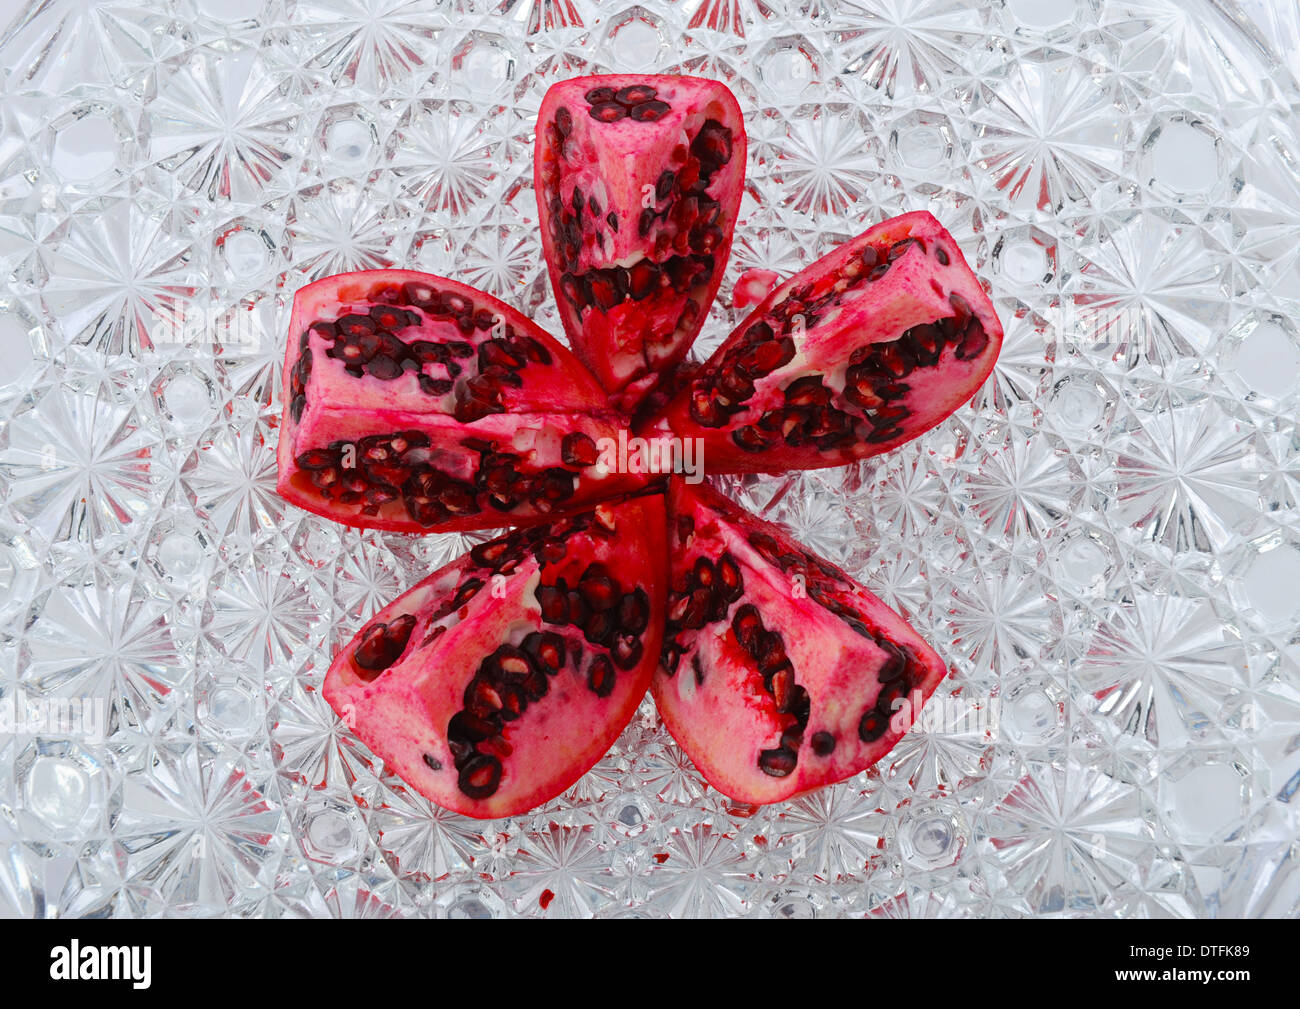 Ripe ruby red pomegranate fruit cut in columns showing rich deep red seeds covered with juicy sweet pulp. Stock Photo